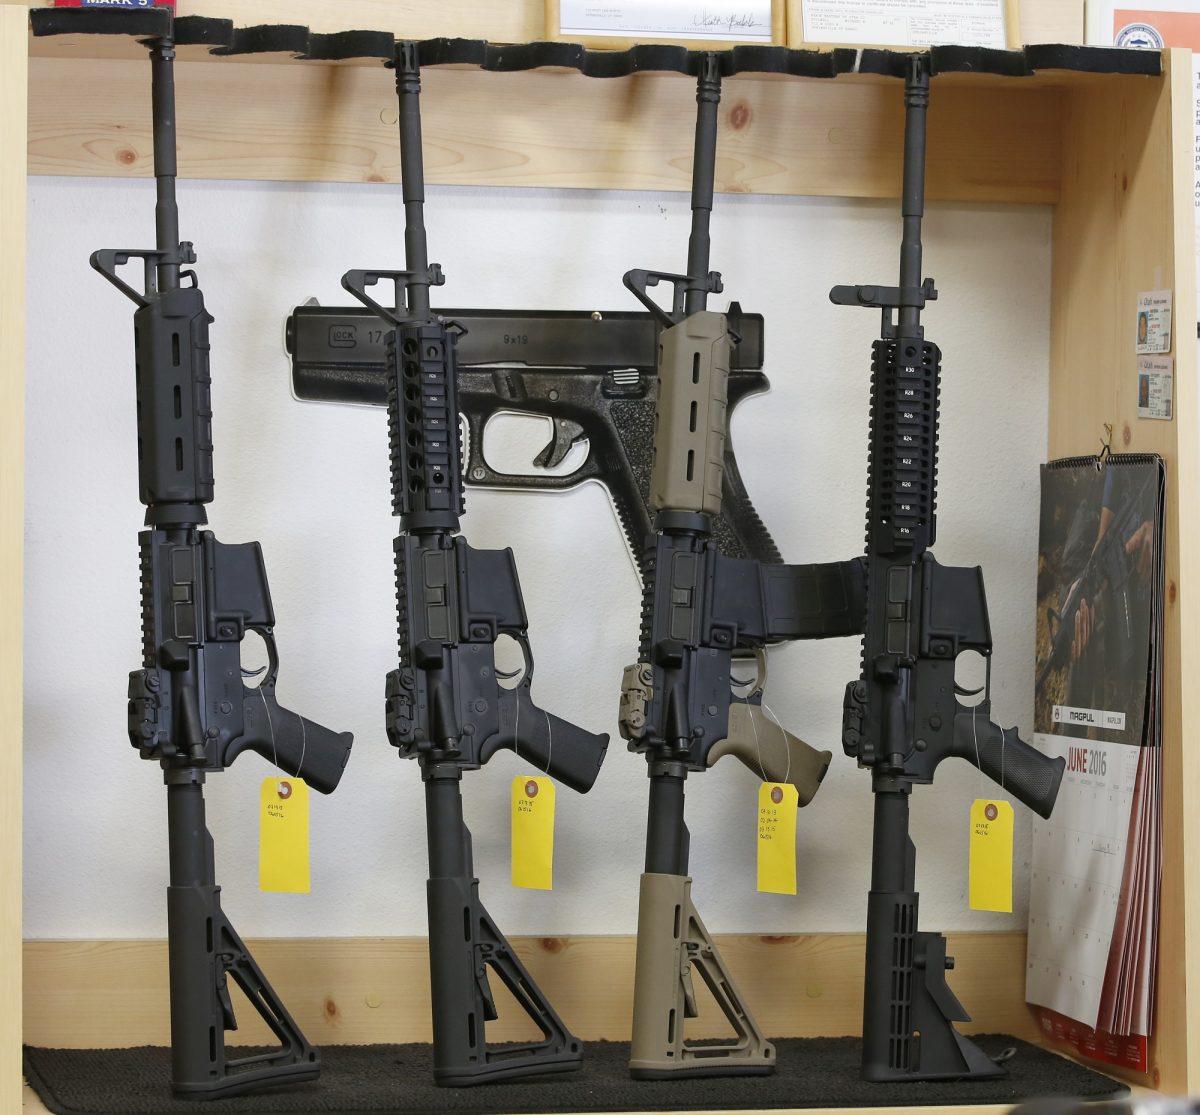 AR-15 semi-automatic guns are on display for sale at a gun store in a 2016 file photograph. (Photo by George Frey/Getty Images)